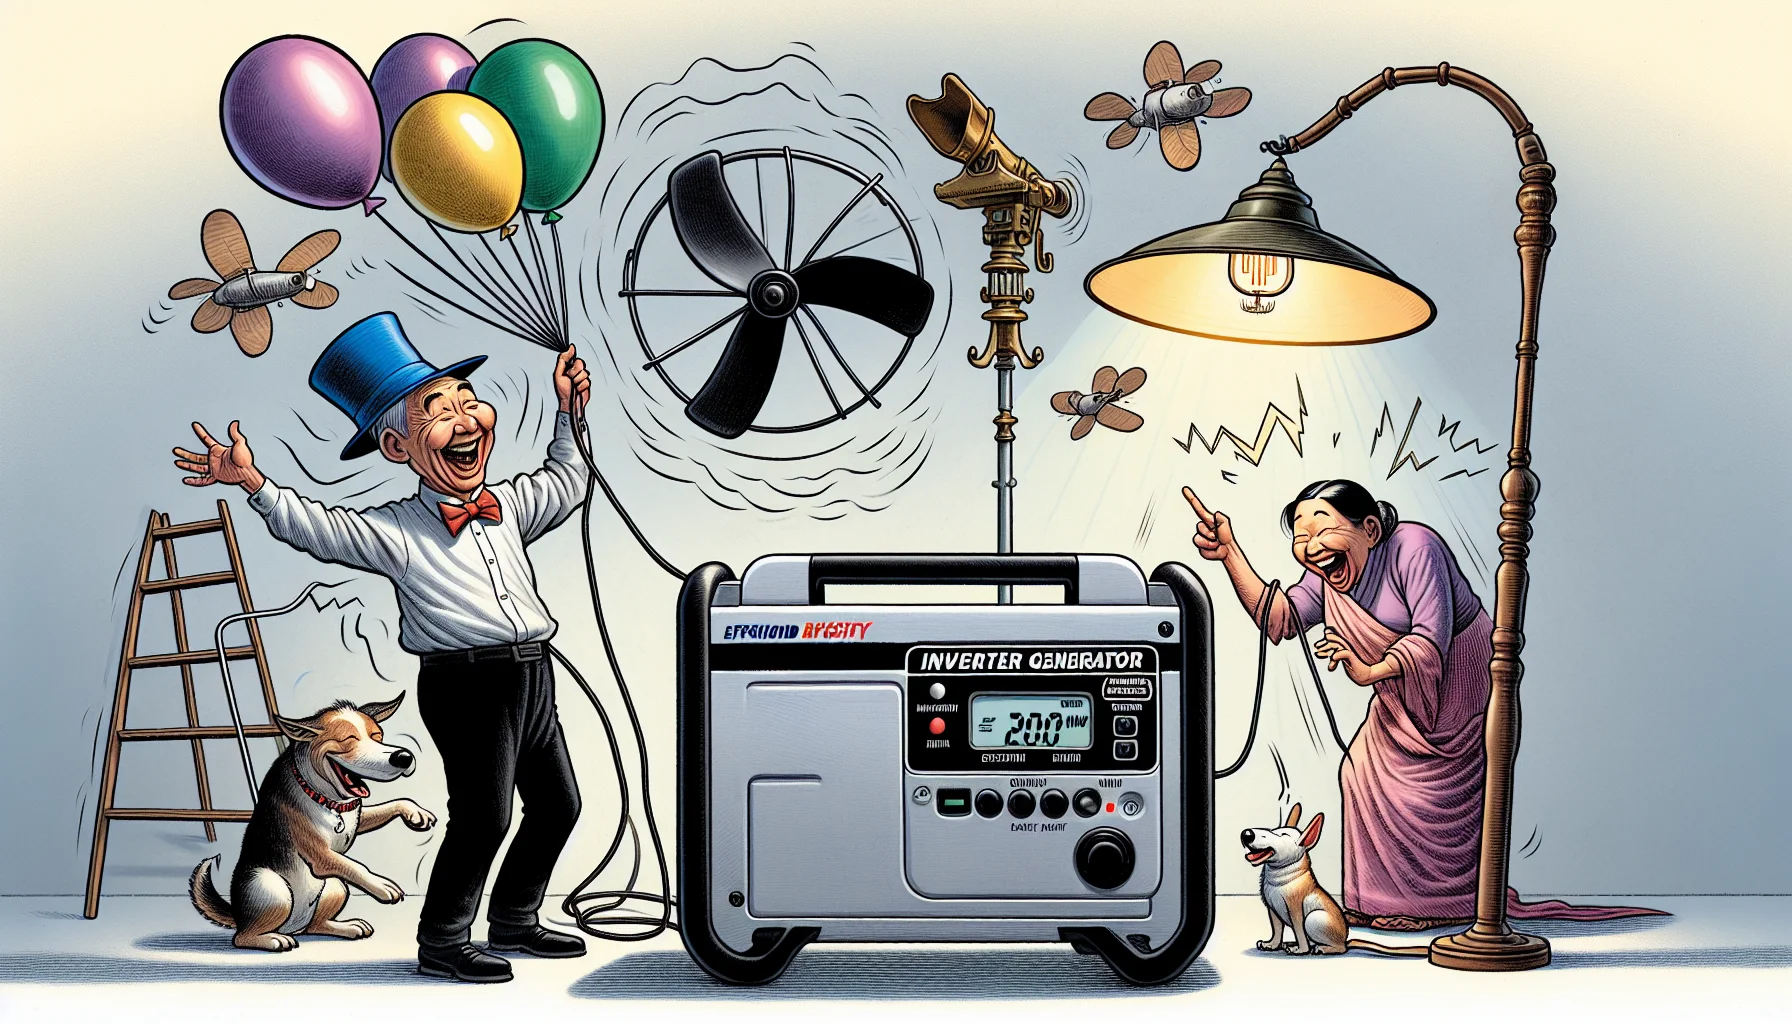 Illustrate a humorous scene showcasing a robust 2000 watt inverter generator. It's silver and modern, with a digital display showing its output. The generator is merrily powering several unexpected items such as a couple of colorful bouncing balloons, an efficient, super-sized electric fan that's making a dog's ears flap comically in the wind, and an antique, brass-plated floor lamp illogically lighting up the daytime surroundings. A jovial East Asian man with a tall blue hat stands near, chuckling while pointing at the generator. A South Asian woman is laughing heartily at the bizarre, yet efficient scene, appealing to people the delight and practicality of generating their own electricity.